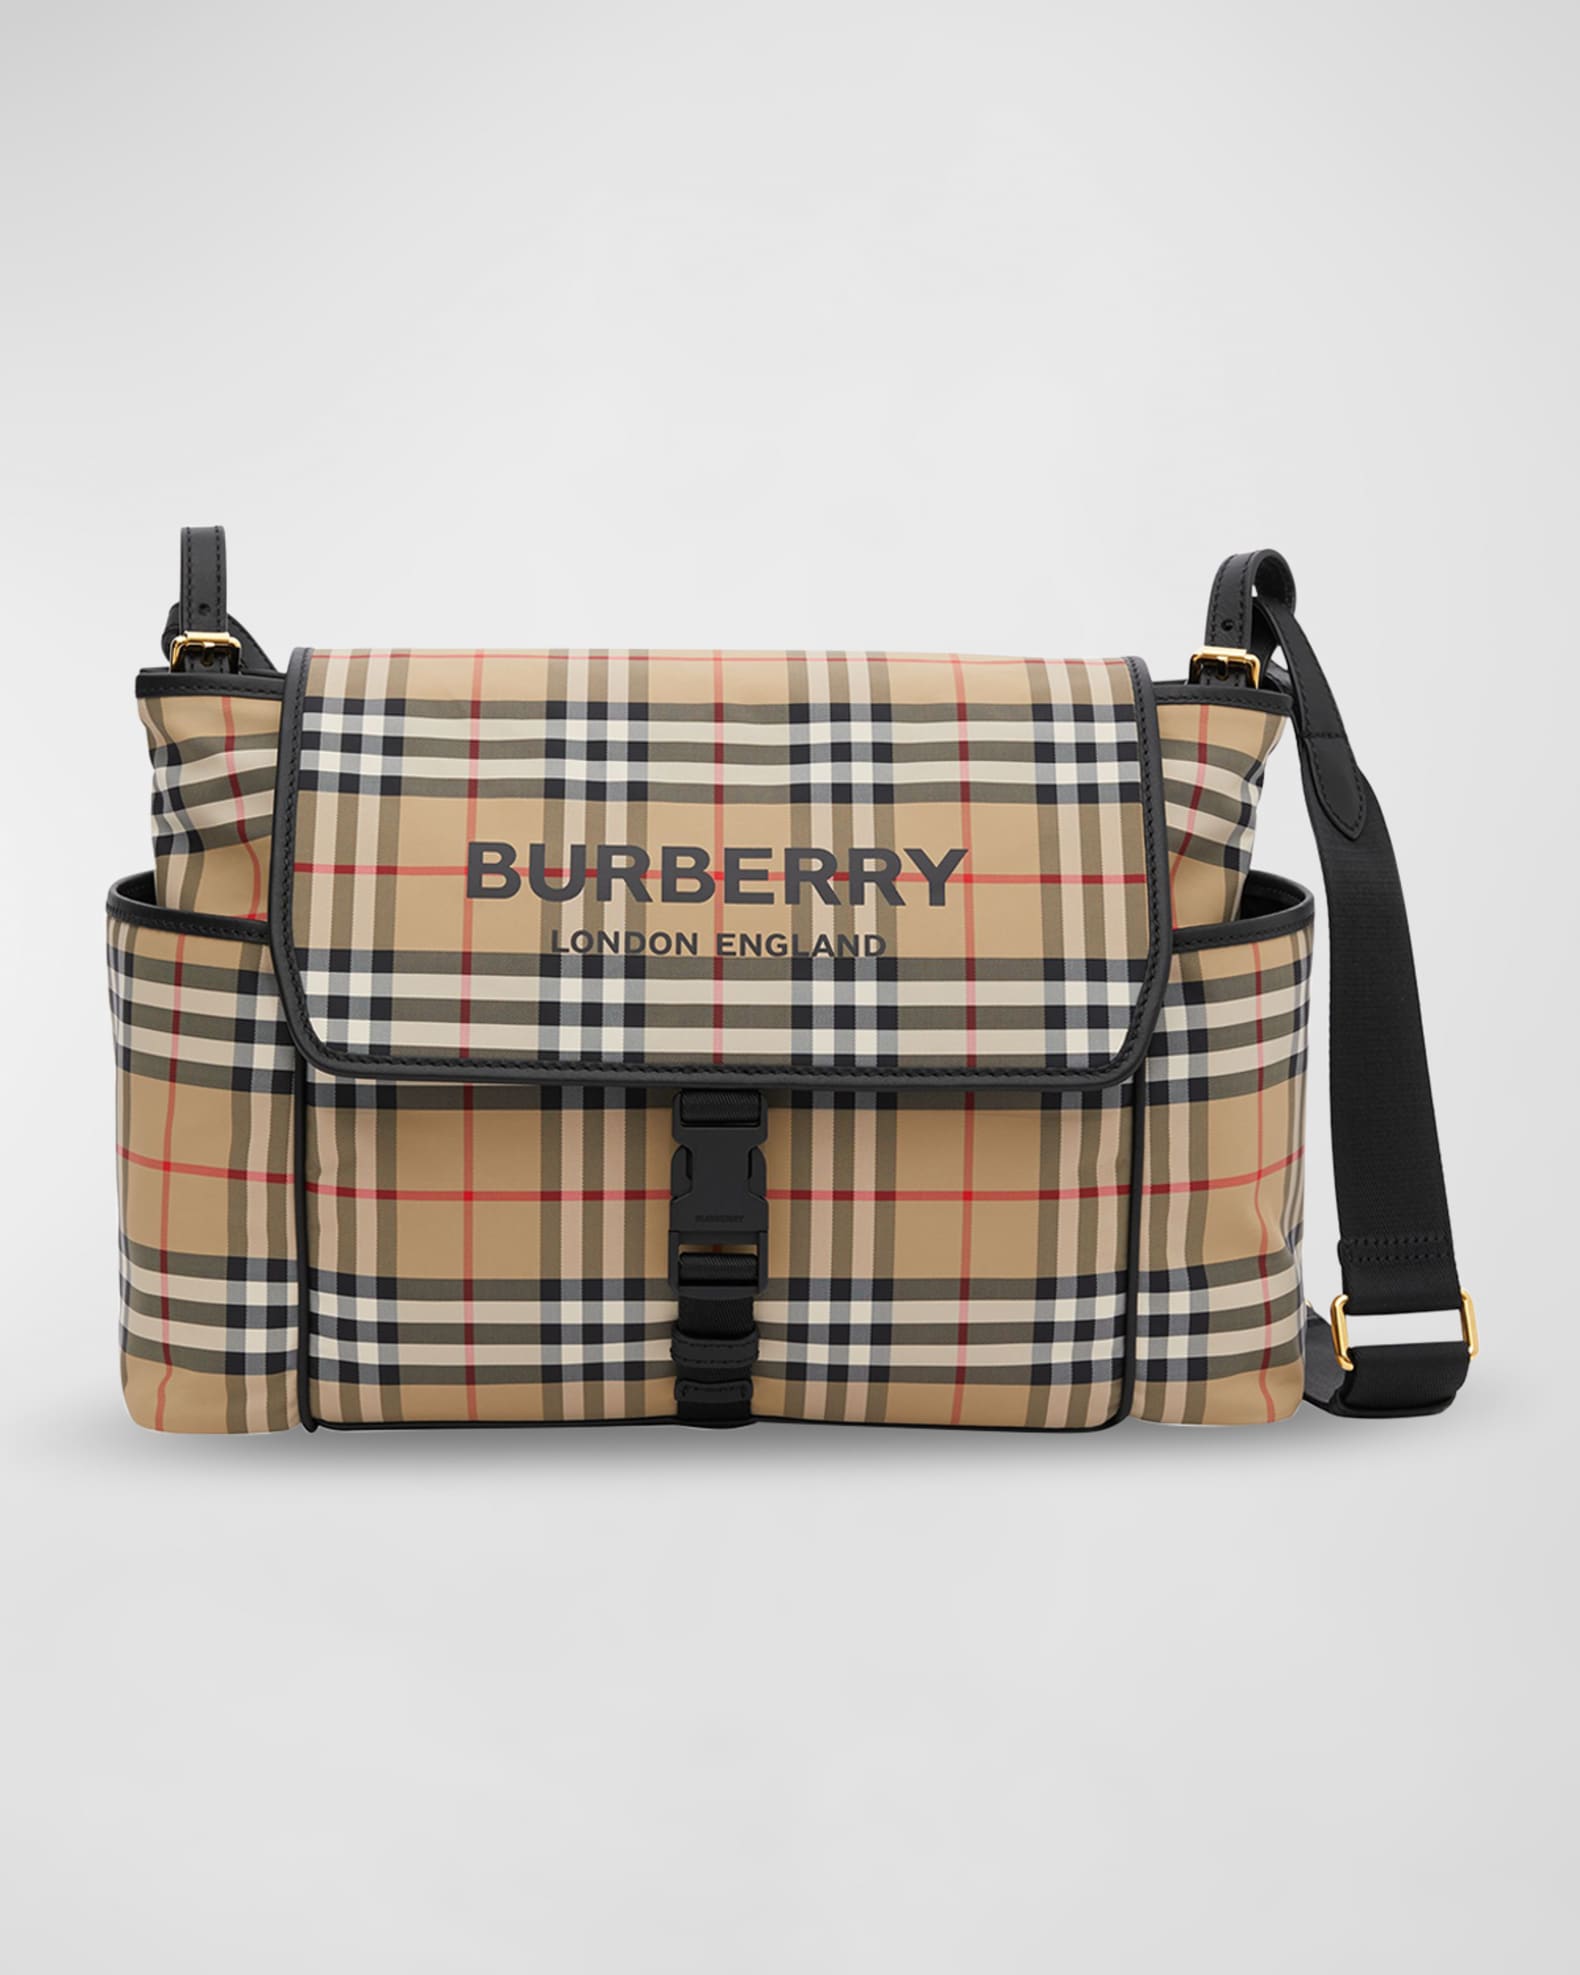 Burberry Vintage Check & Leather Diaper Bag w/ Changing Pad | Neiman Marcus